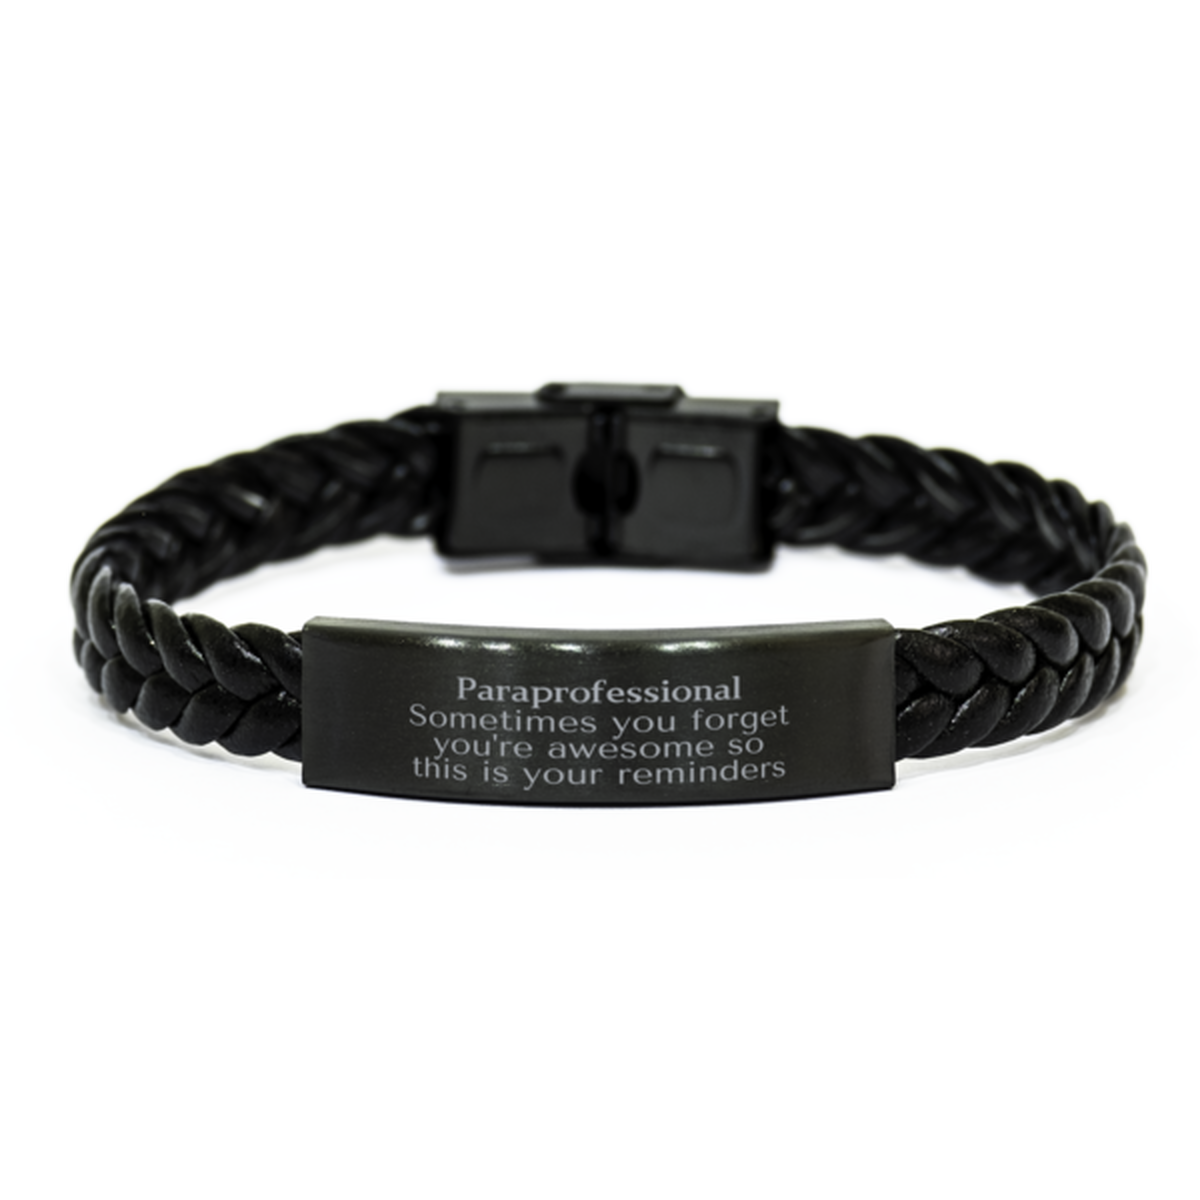 Sentimental Paraprofessional Braided Leather Bracelet, Paraprofessional Sometimes you forget you're awesome so this is your reminders, Graduation Christmas Birthday Gifts for Paraprofessional, Men, Women, Coworkers